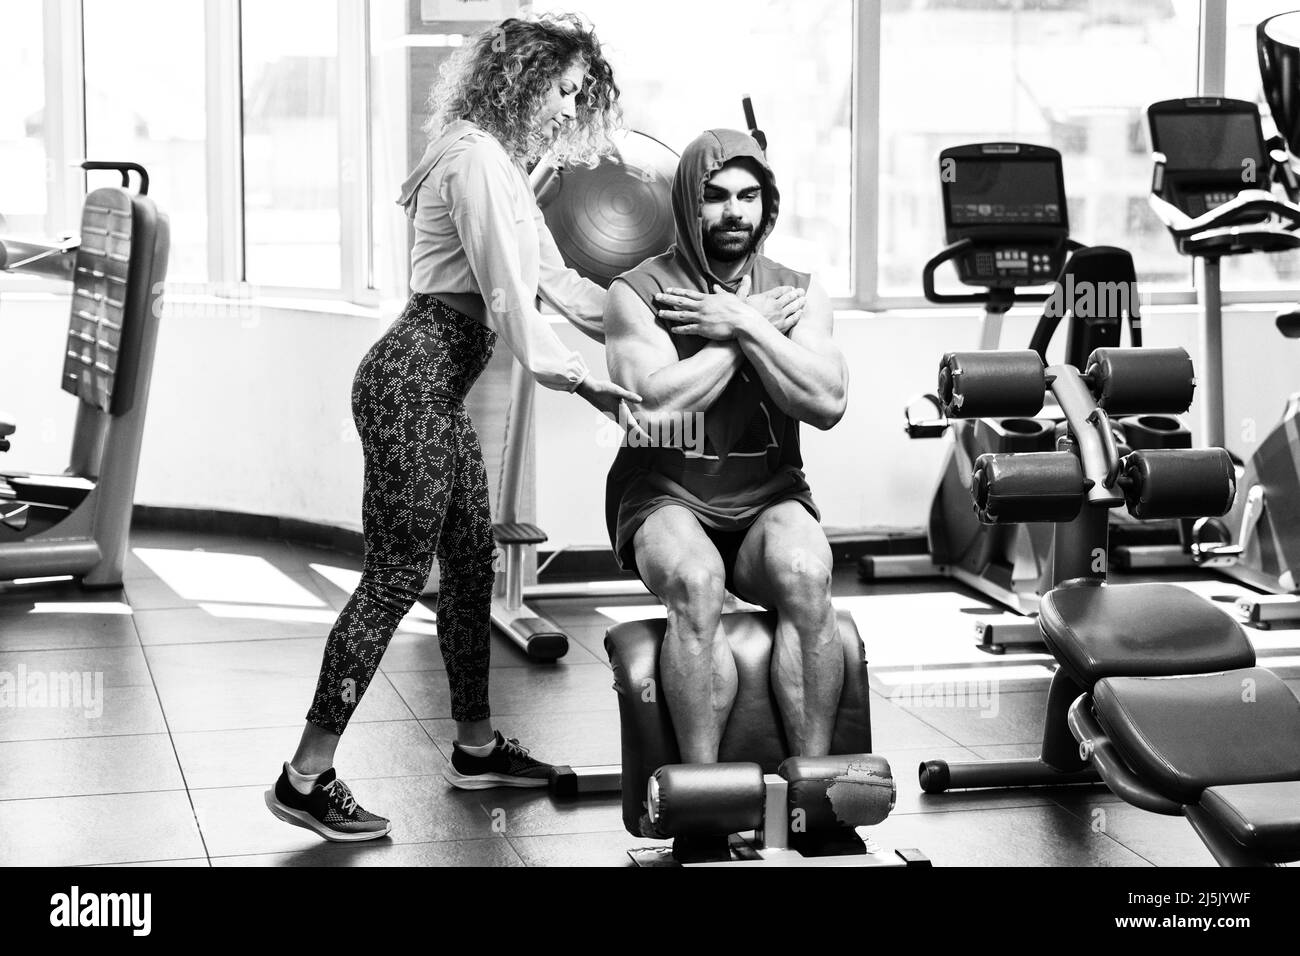 Personal trainer Black and White Stock Photos & Images - Page 2 - Alamy